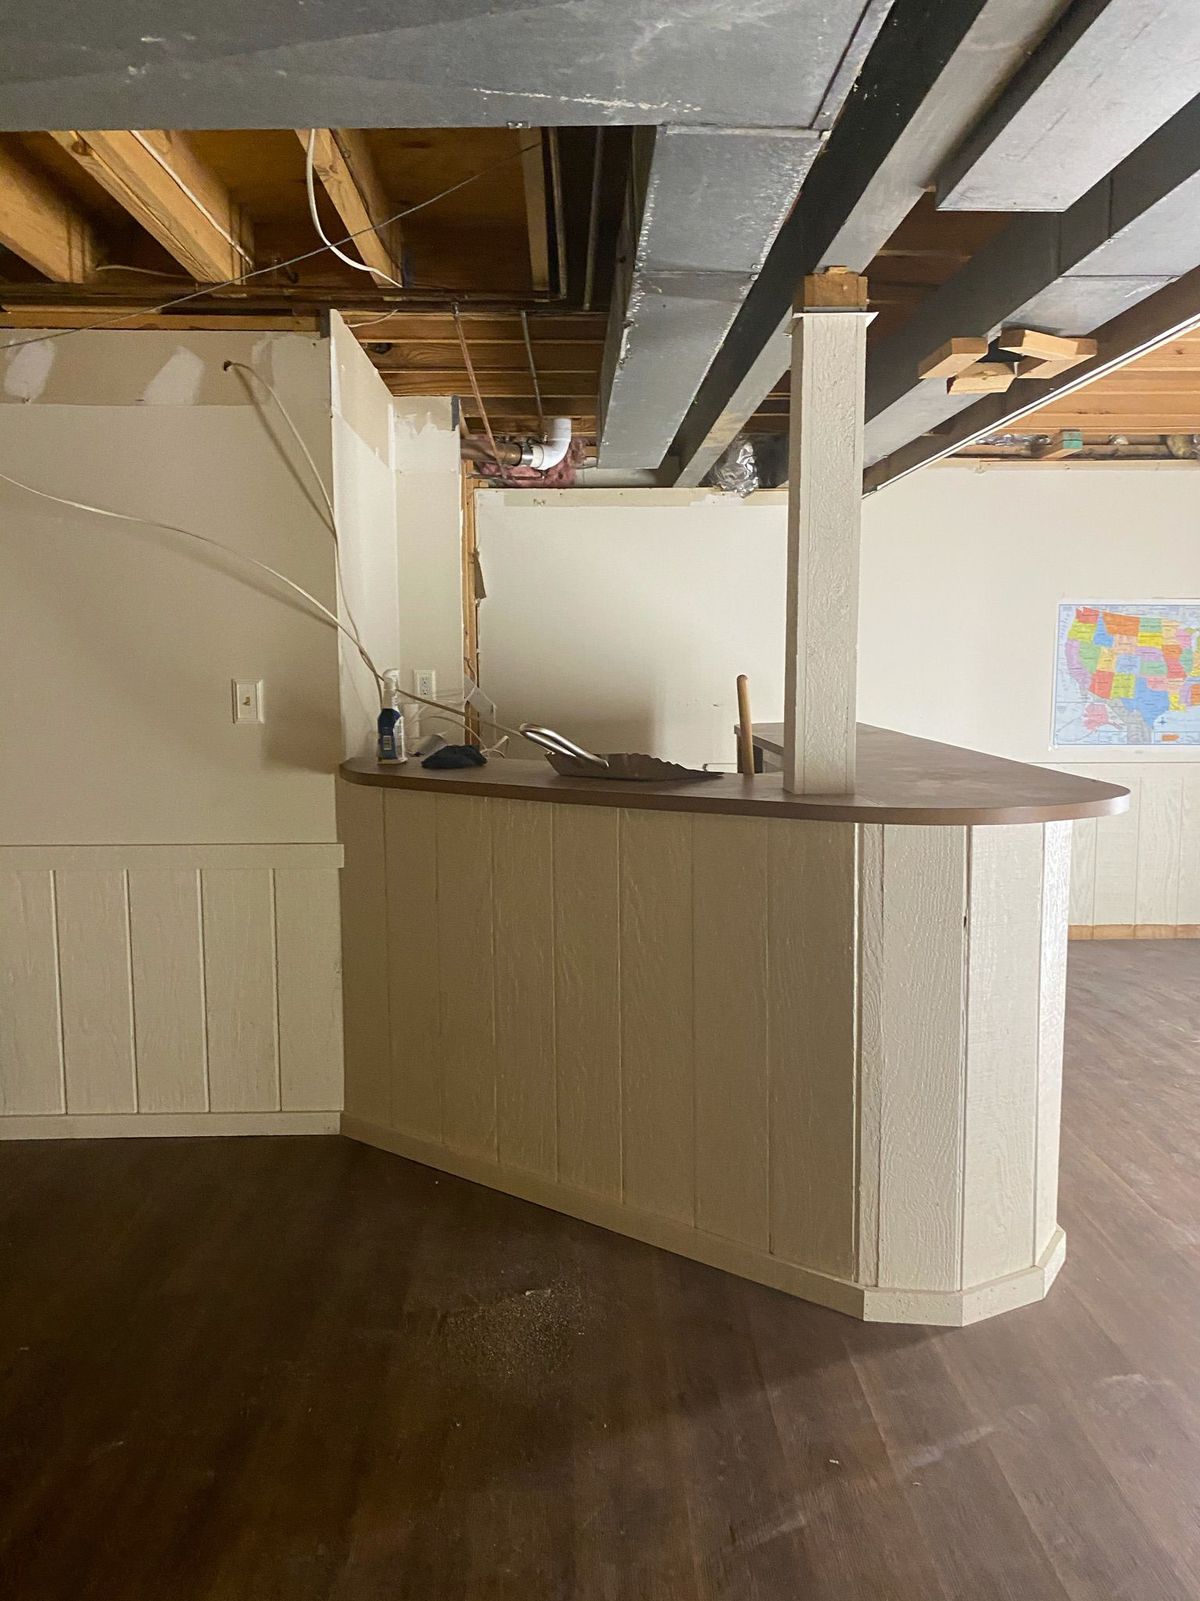 A basement bar in the process of remodeling